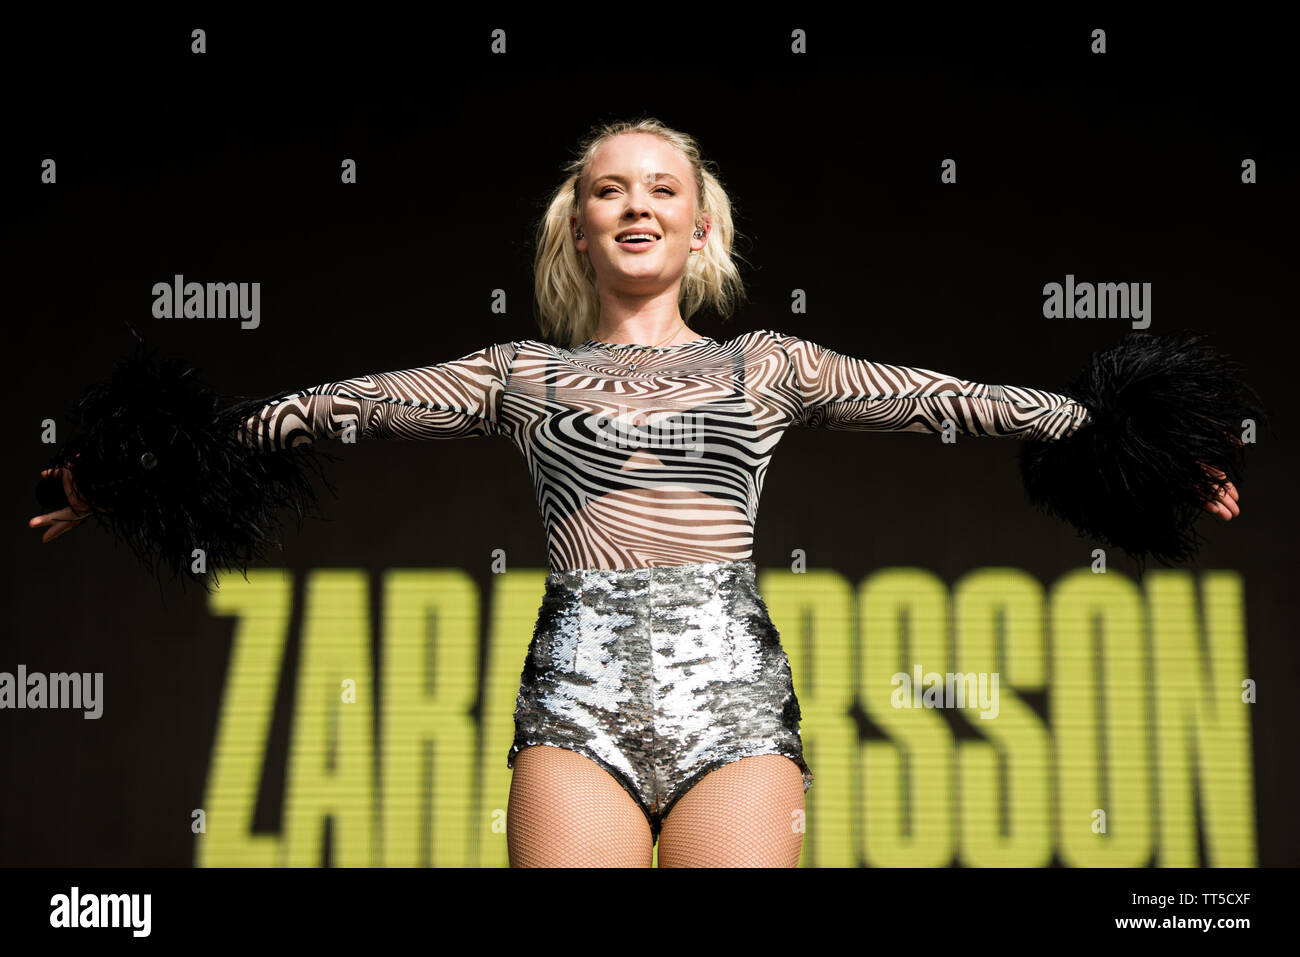 The Swedish singer Zara Larsson performing live on stage at the Firenze  Rocks festival 2019 in Florence, Italy, opening for Ed Sheeran Stock Photo  - Alamy